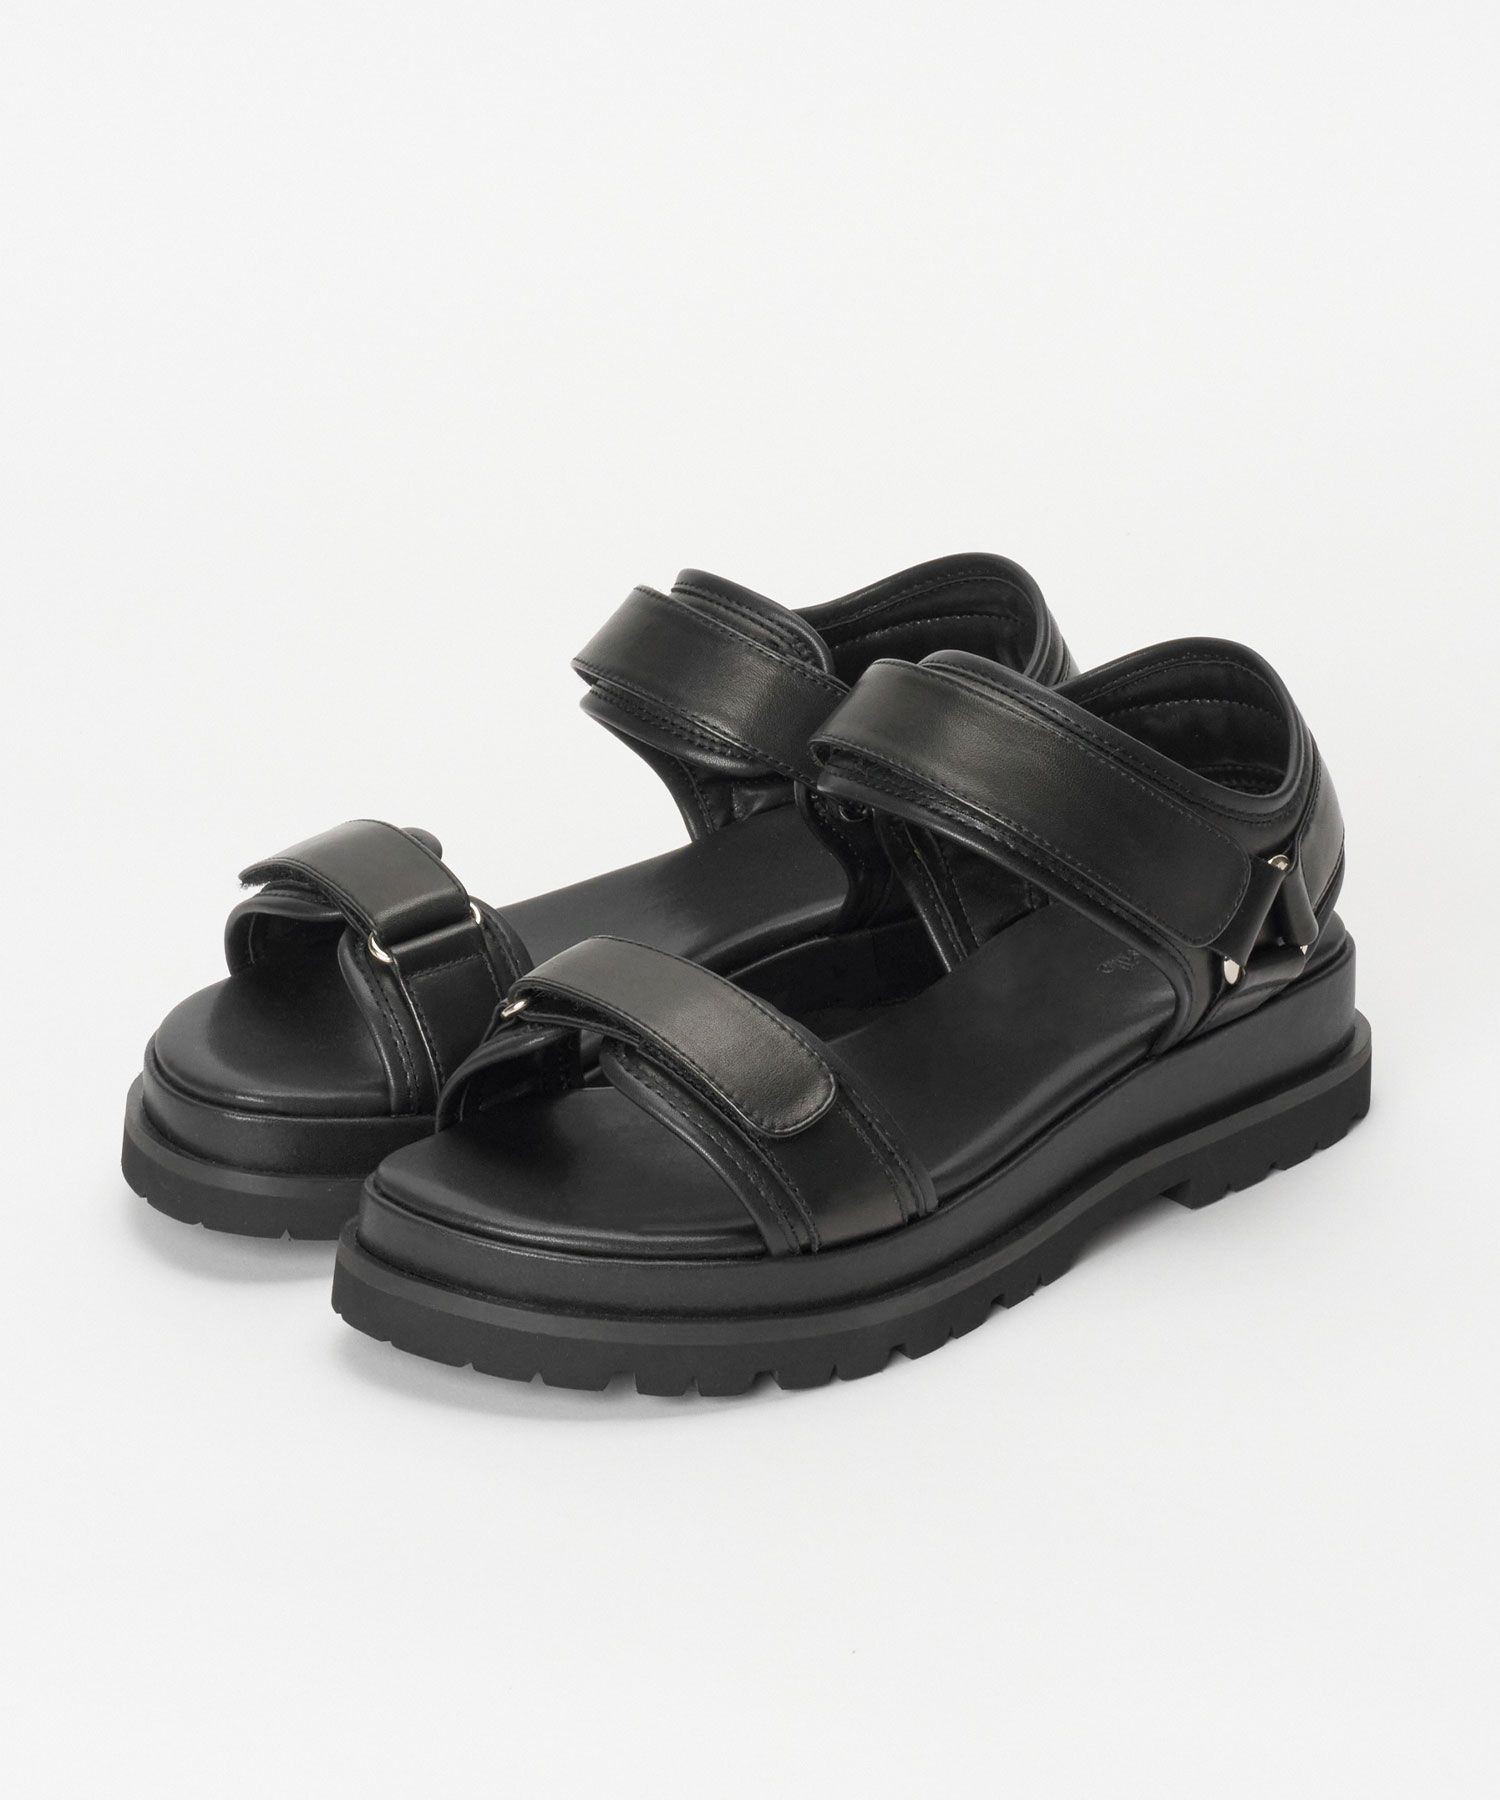 Luca Grossi(ルカグロッシ)】 DOUBLE BELTED WEDGE SANDAL|allureville 